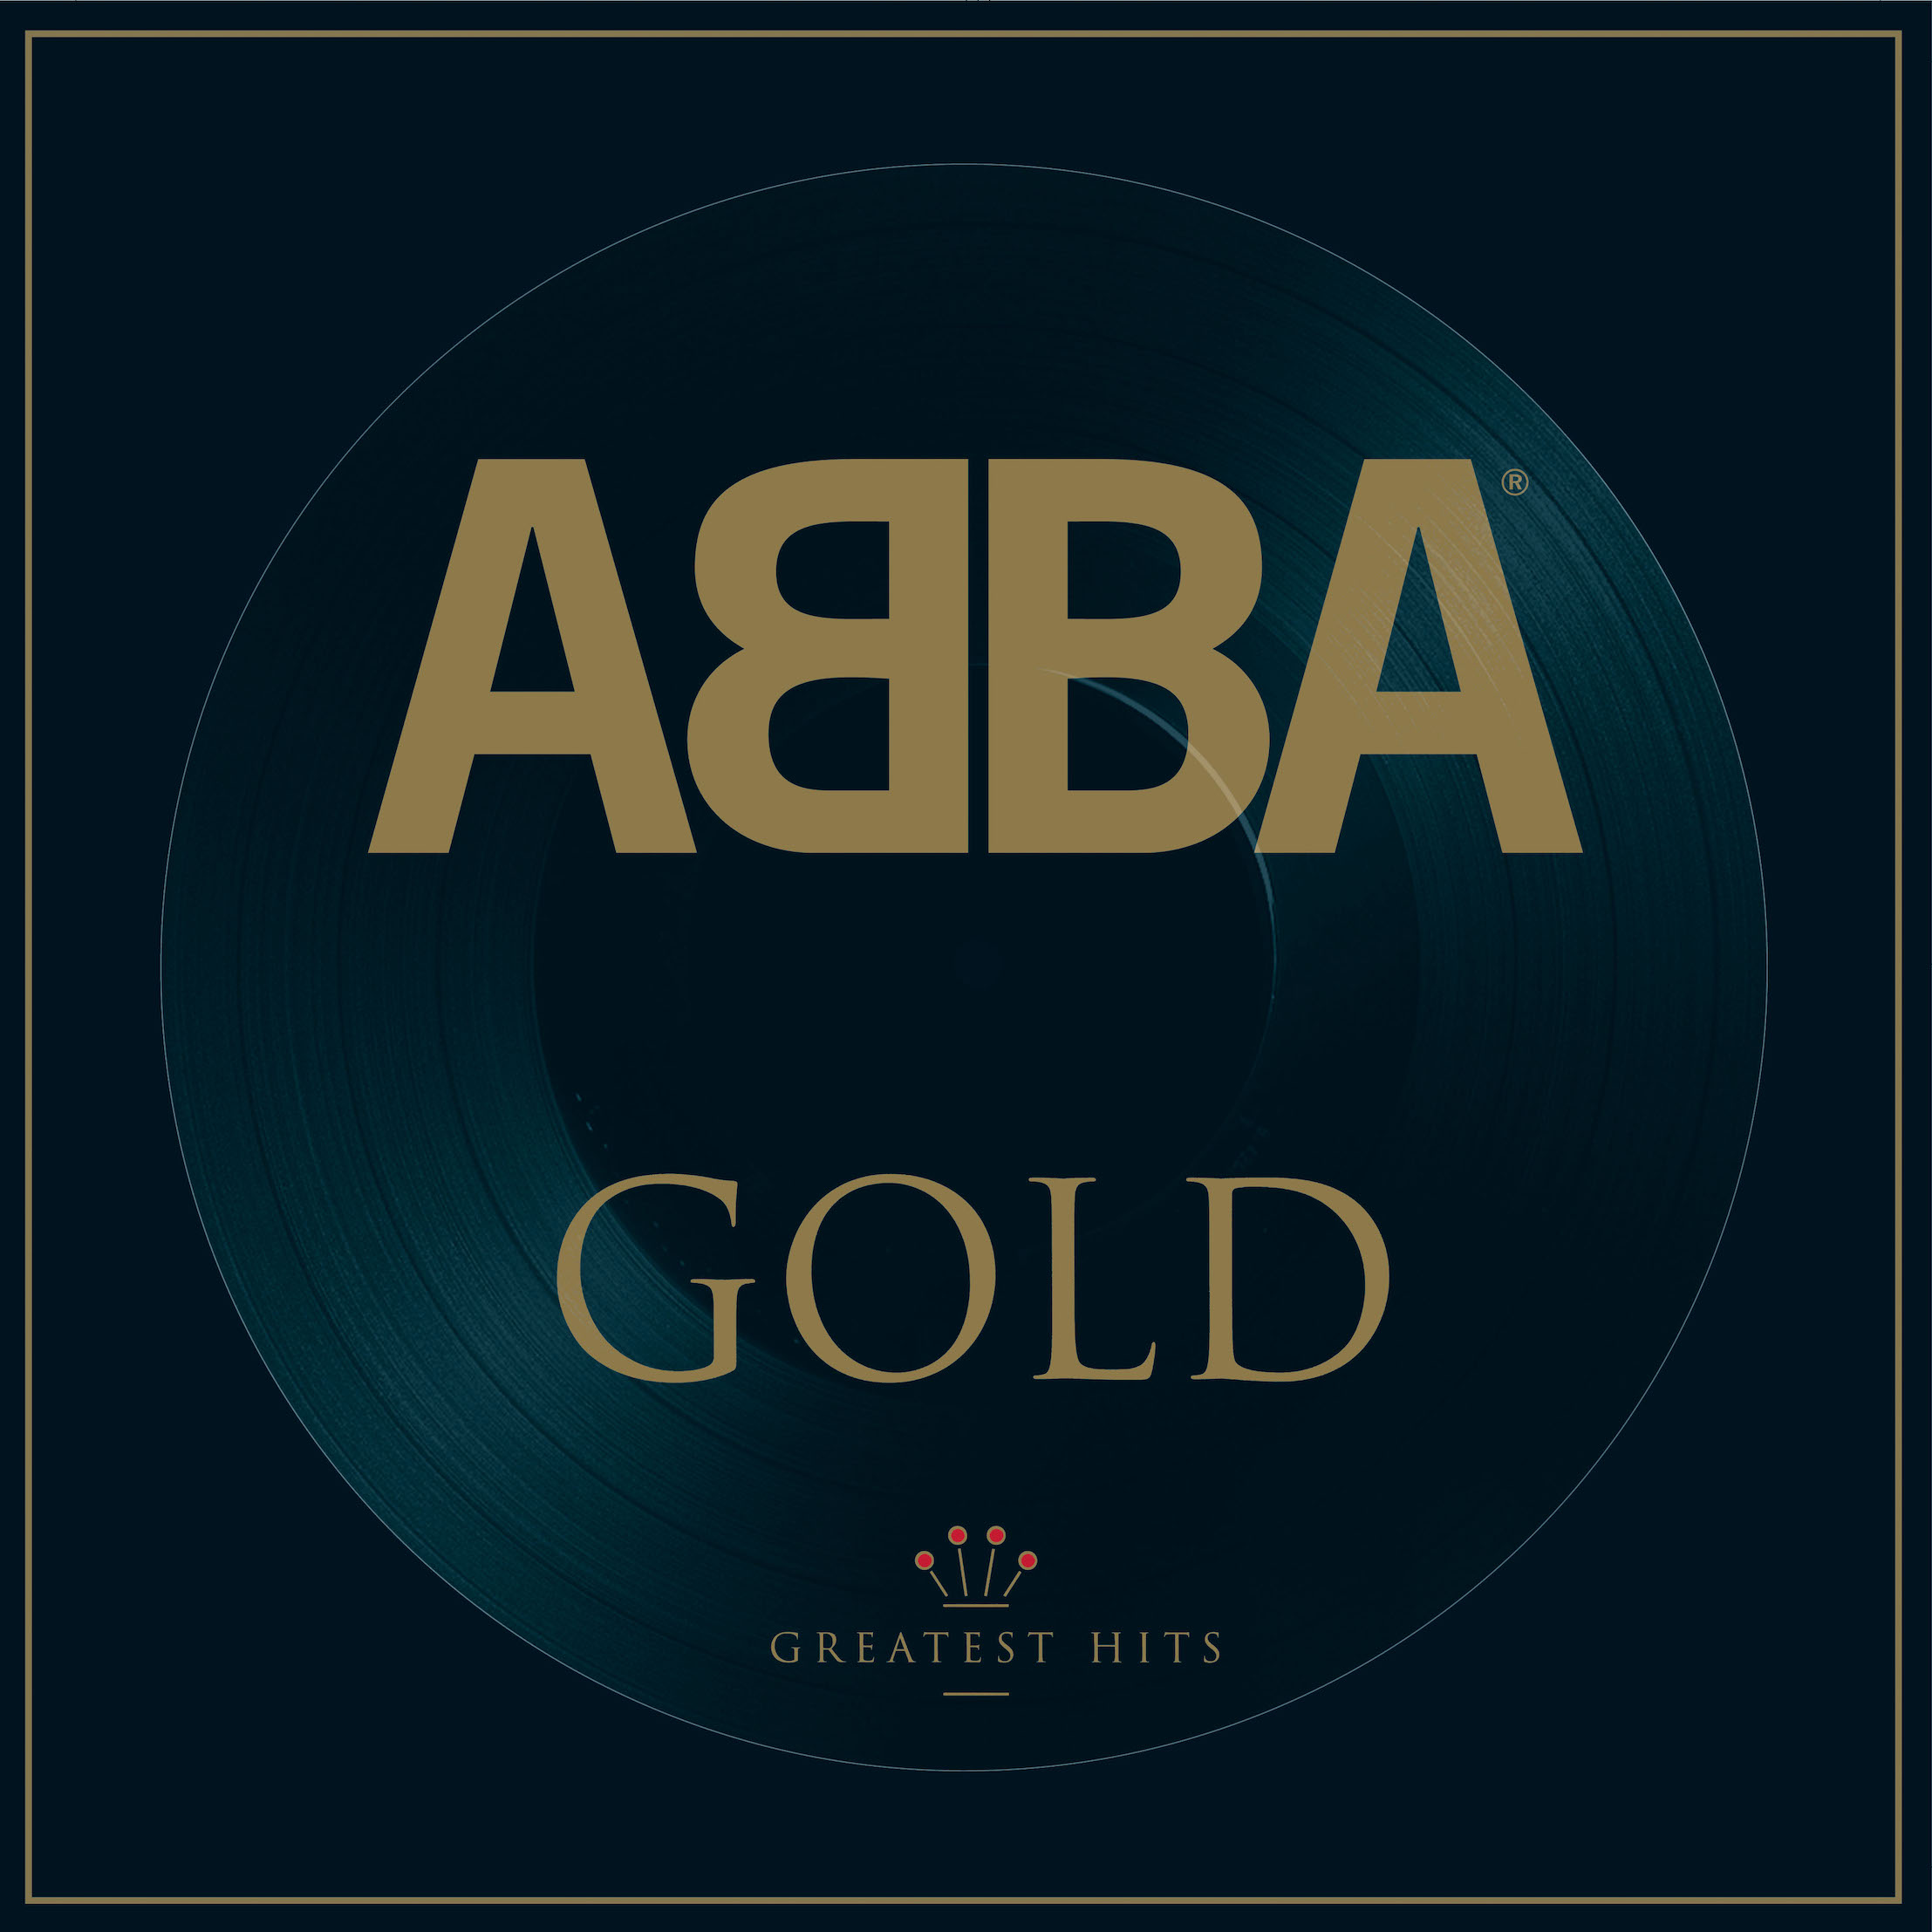 `ABBA Gold` (Image courtesy of Reybee)